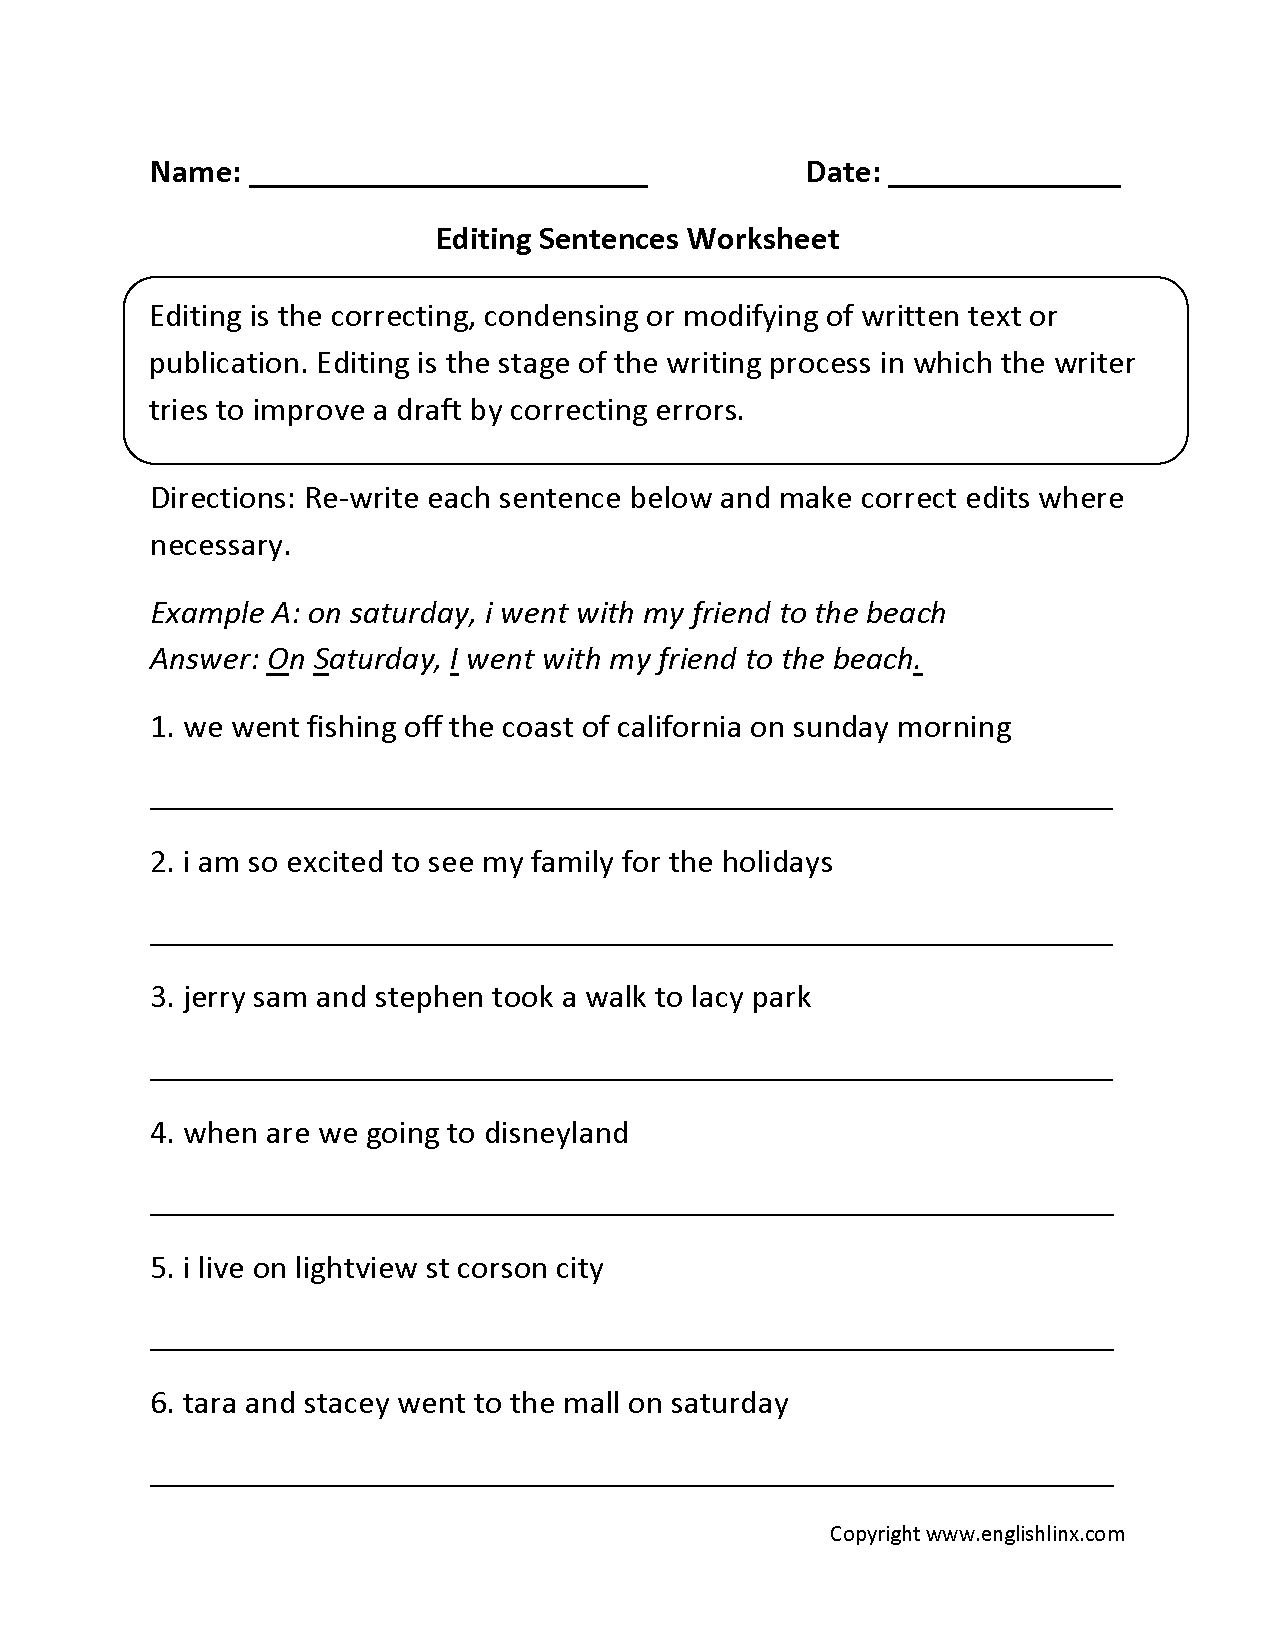 Writing Worksheets  Editing Worksheets Also Proofreading Practice Worksheets